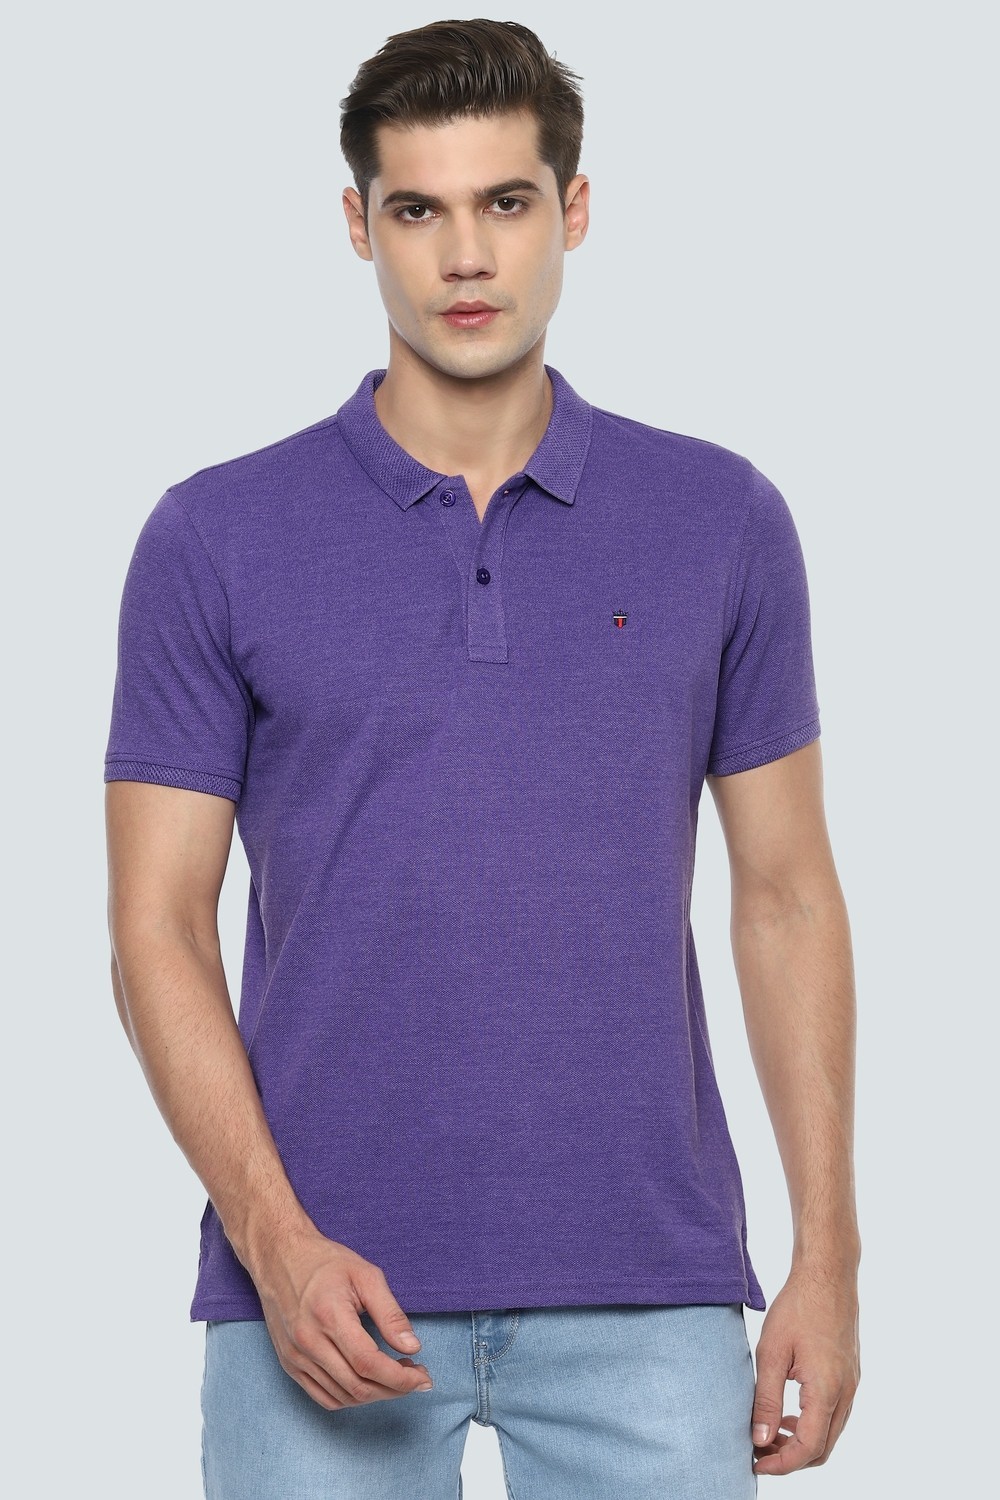 Buy LOUIS PHILIPPE Mens Solid Polo T-Shirt